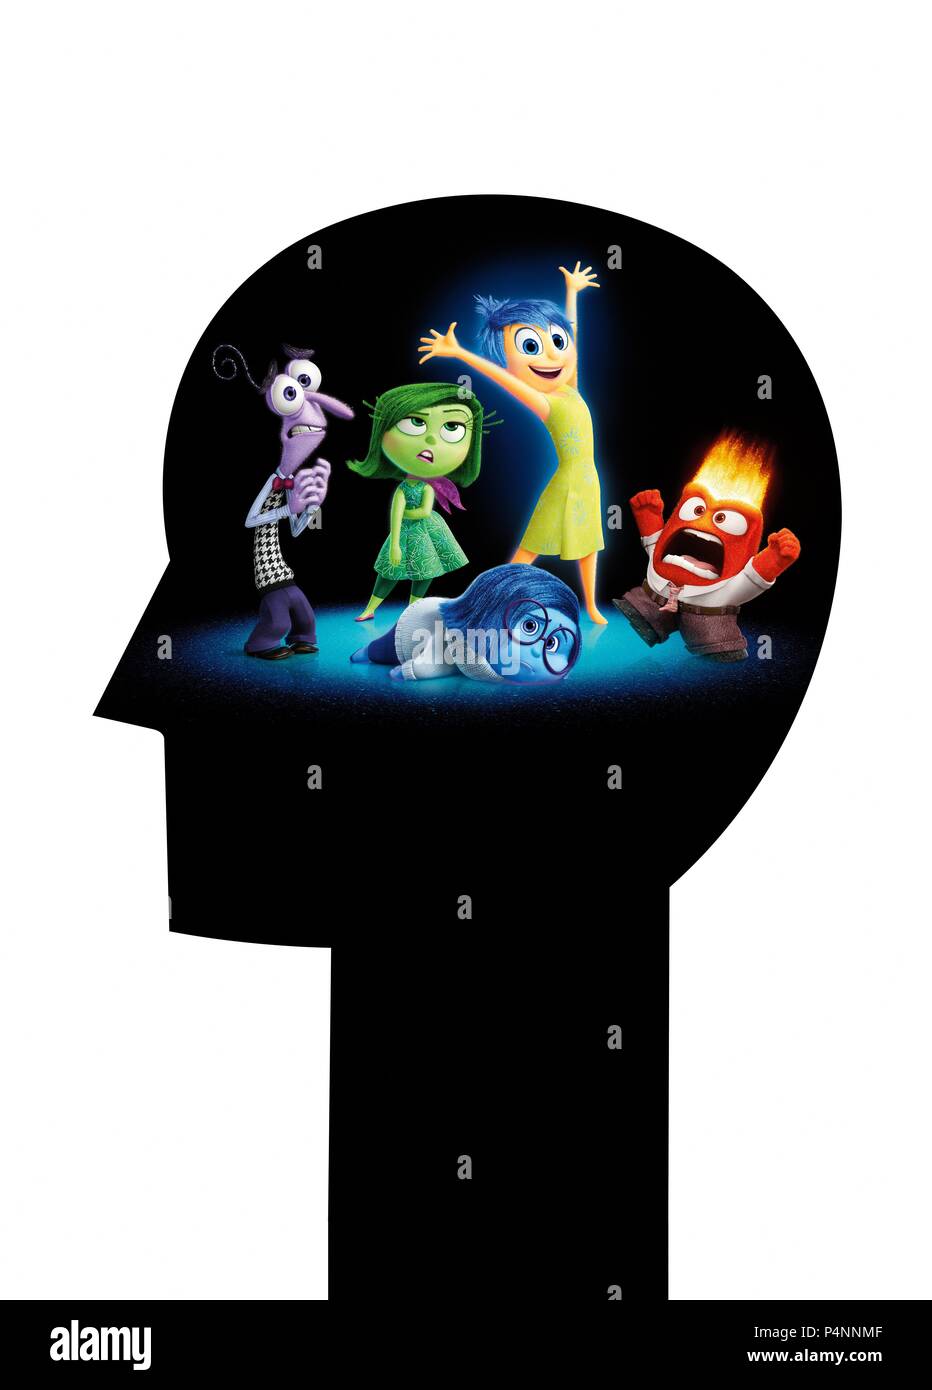 Original Film Title: INSIDE OUT.  English Title: INSIDE OUT.  Film Director: PETE DOCTER.  Year: 2015. Credit: PIXAR ANIMATION STUDIOS/WALT DISNEY PICTURES / Album Stock Photo